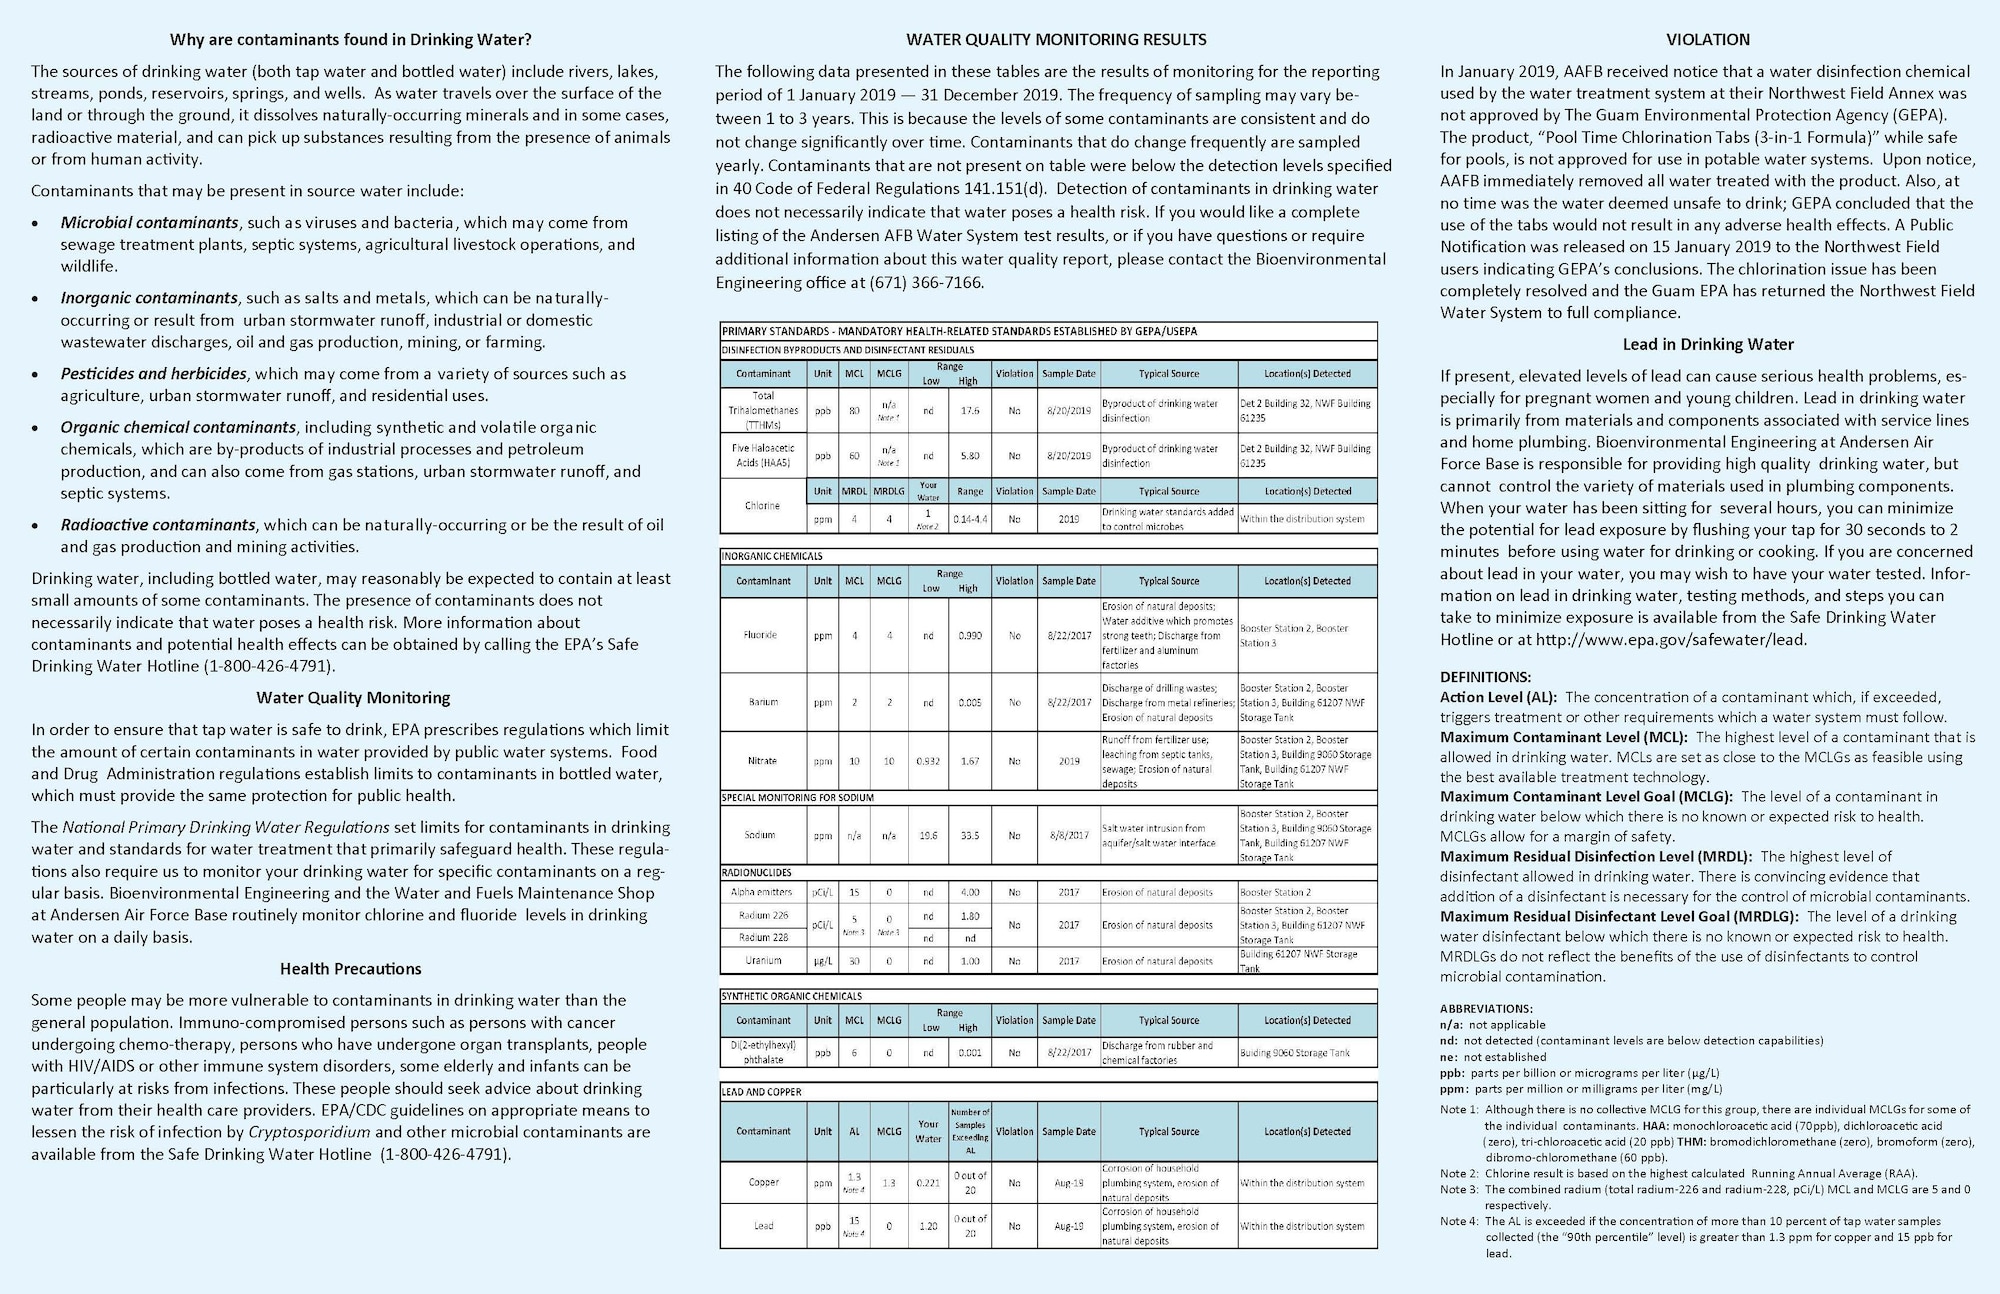 2019 Annual Drinking Water Quality Report